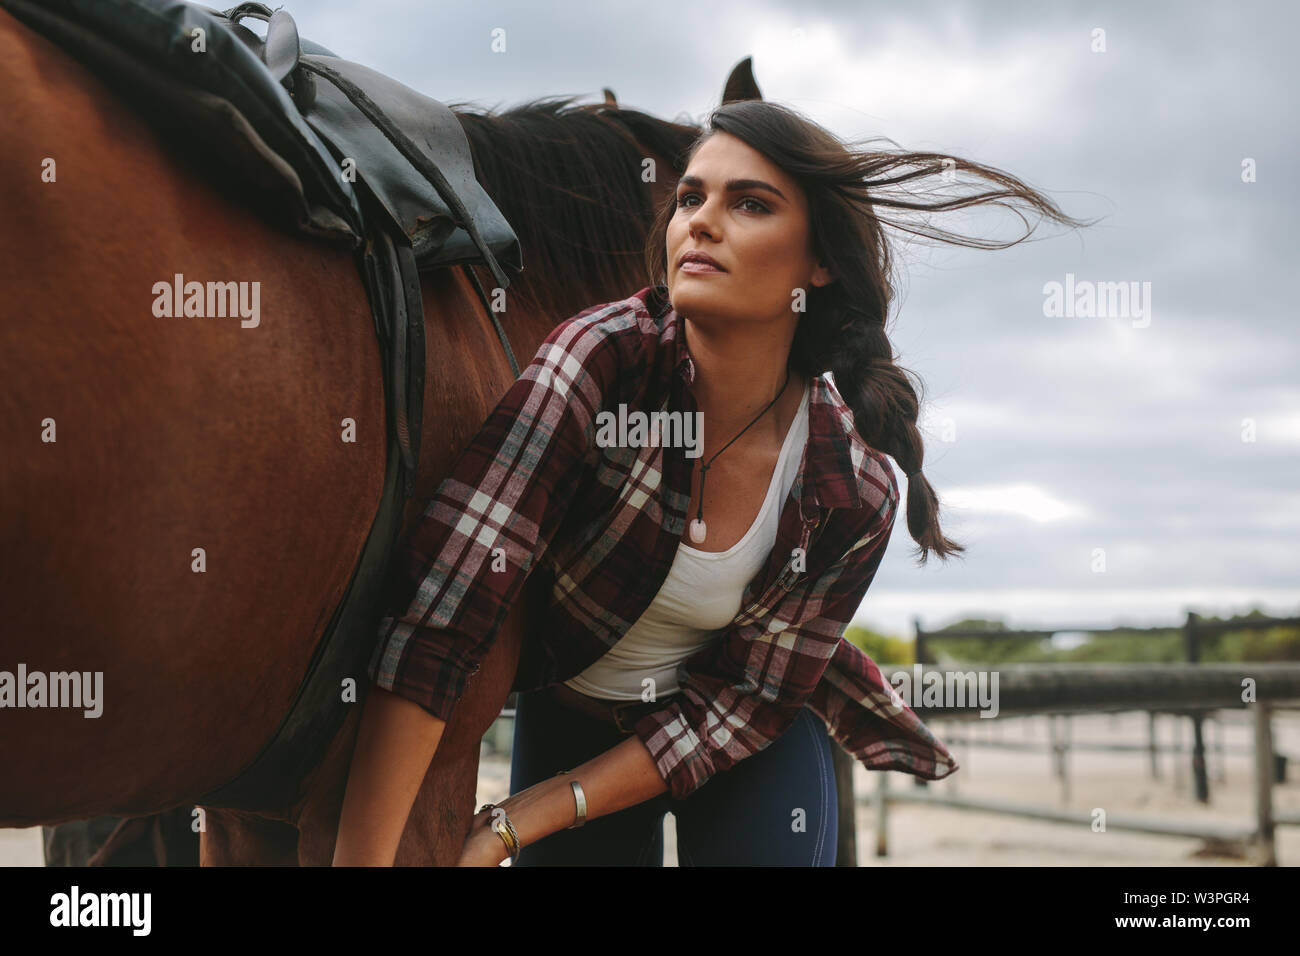 Young woman harnessing a horse at stable place. Cowgirl getting ready for horseback riding. Stock Photo